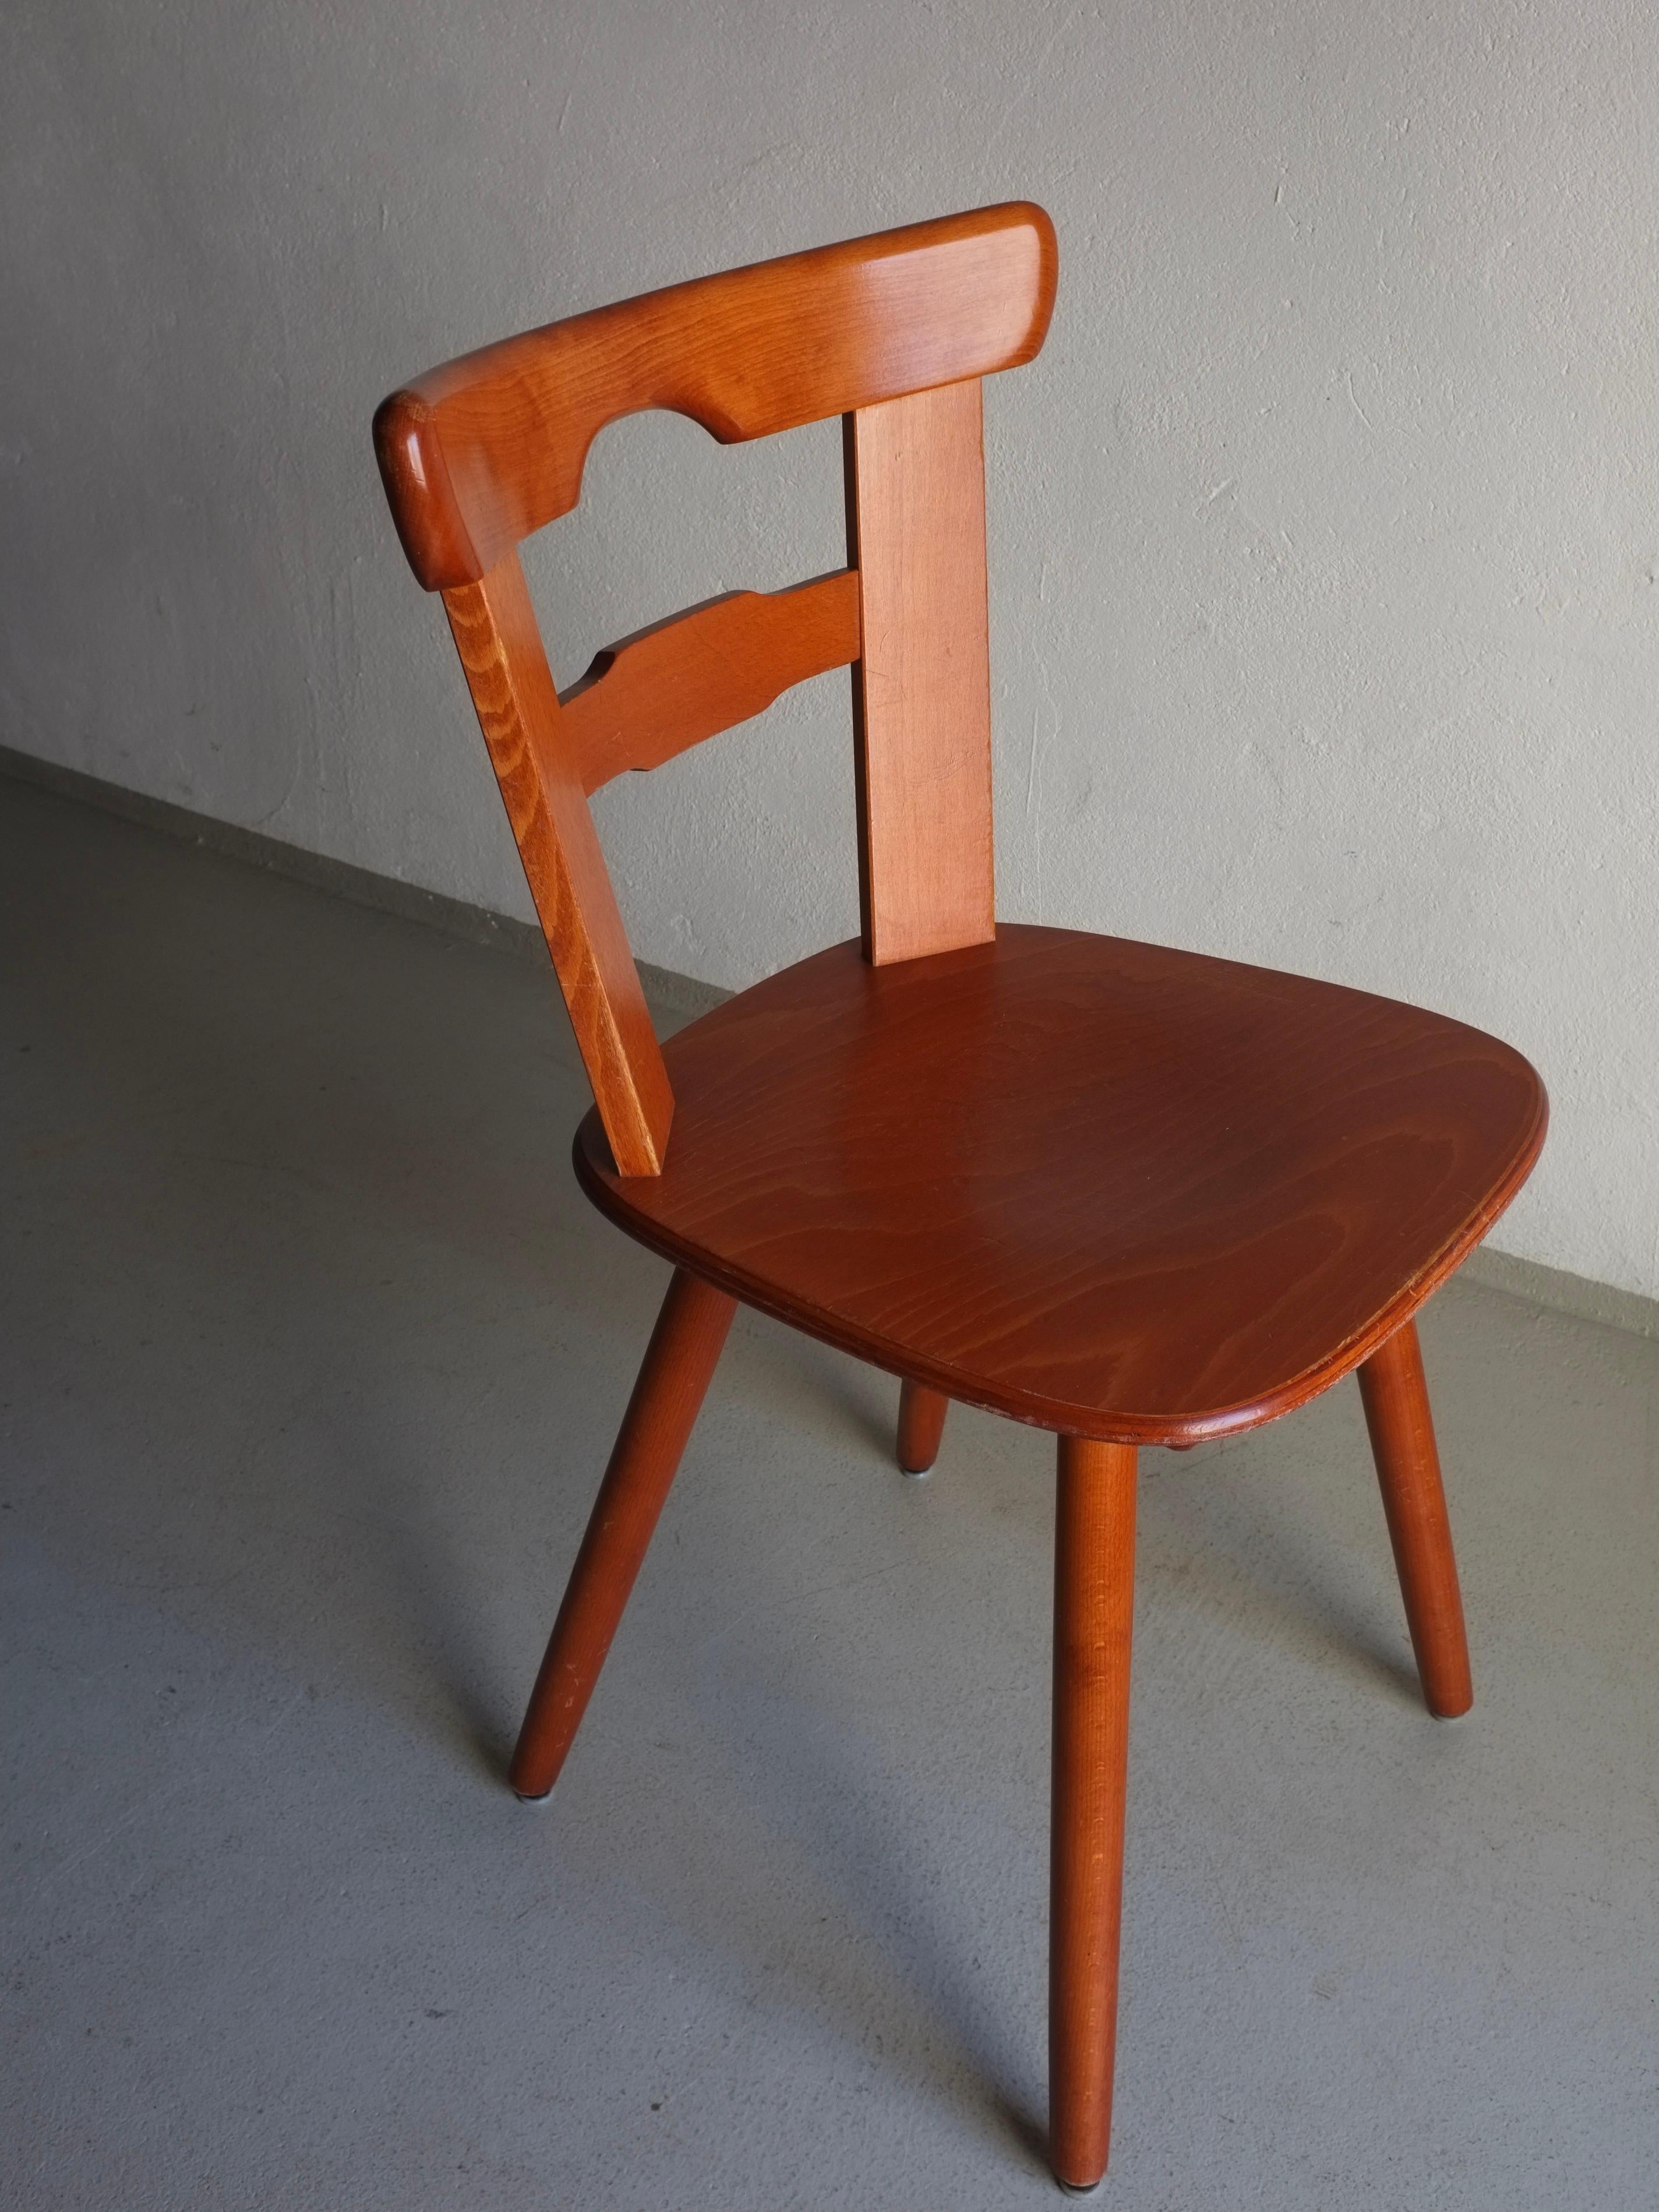 6 Carved Wood Dining Chairs, Netherlands, 1970s For Sale 2